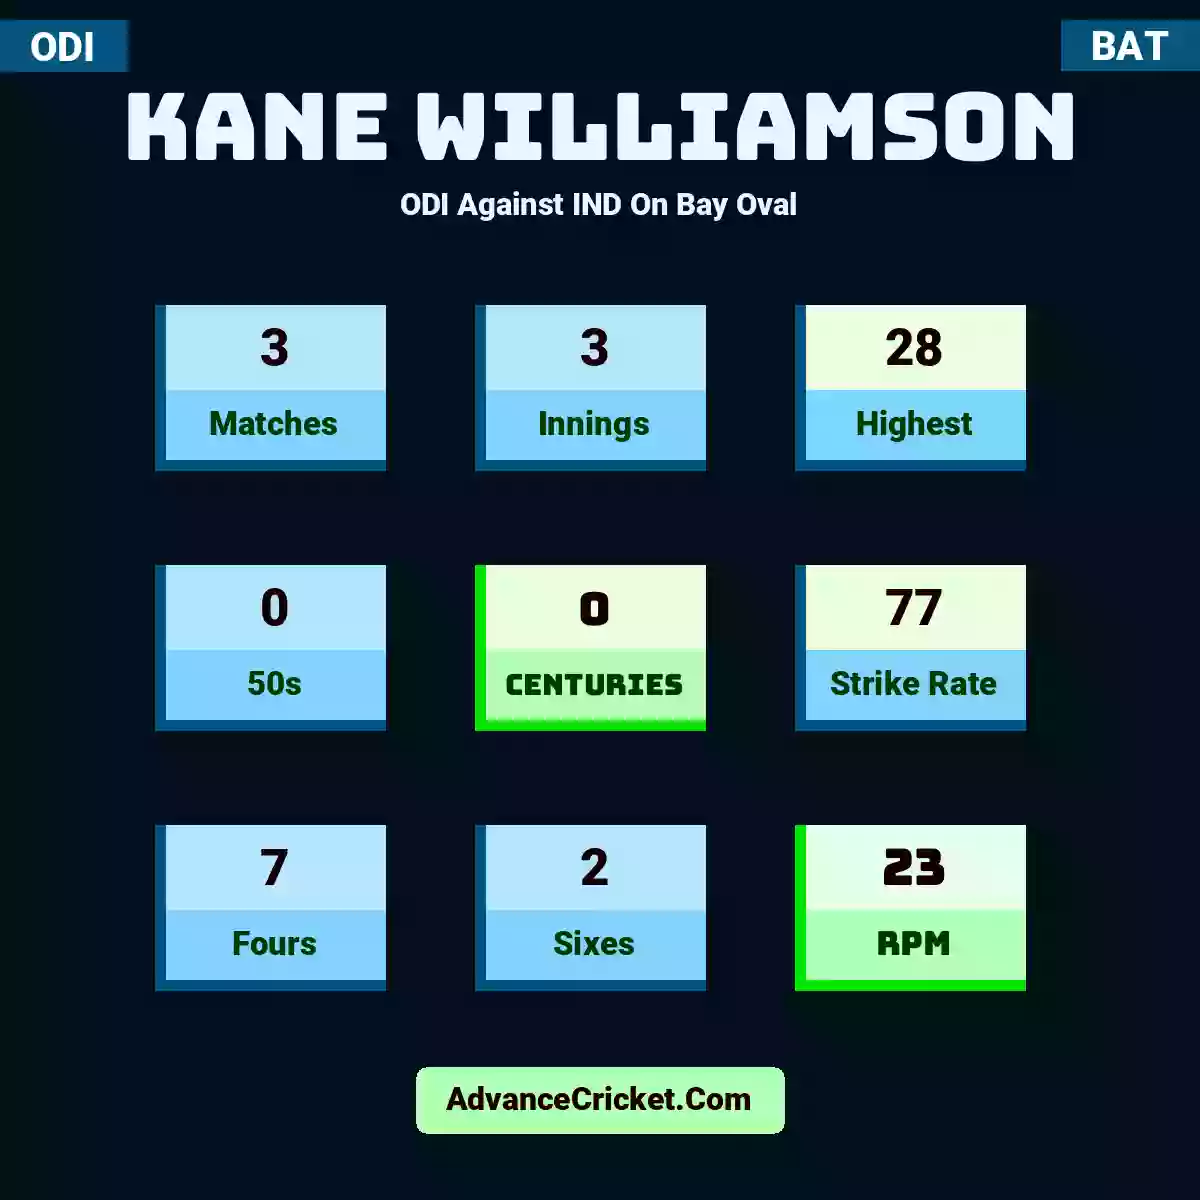 Kane Williamson ODI  Against IND On Bay Oval, Kane Williamson played 3 matches, scored 28 runs as highest, 0 half-centuries, and 0 centuries, with a strike rate of 77. K.Williamson hit 7 fours and 2 sixes, with an RPM of 23.